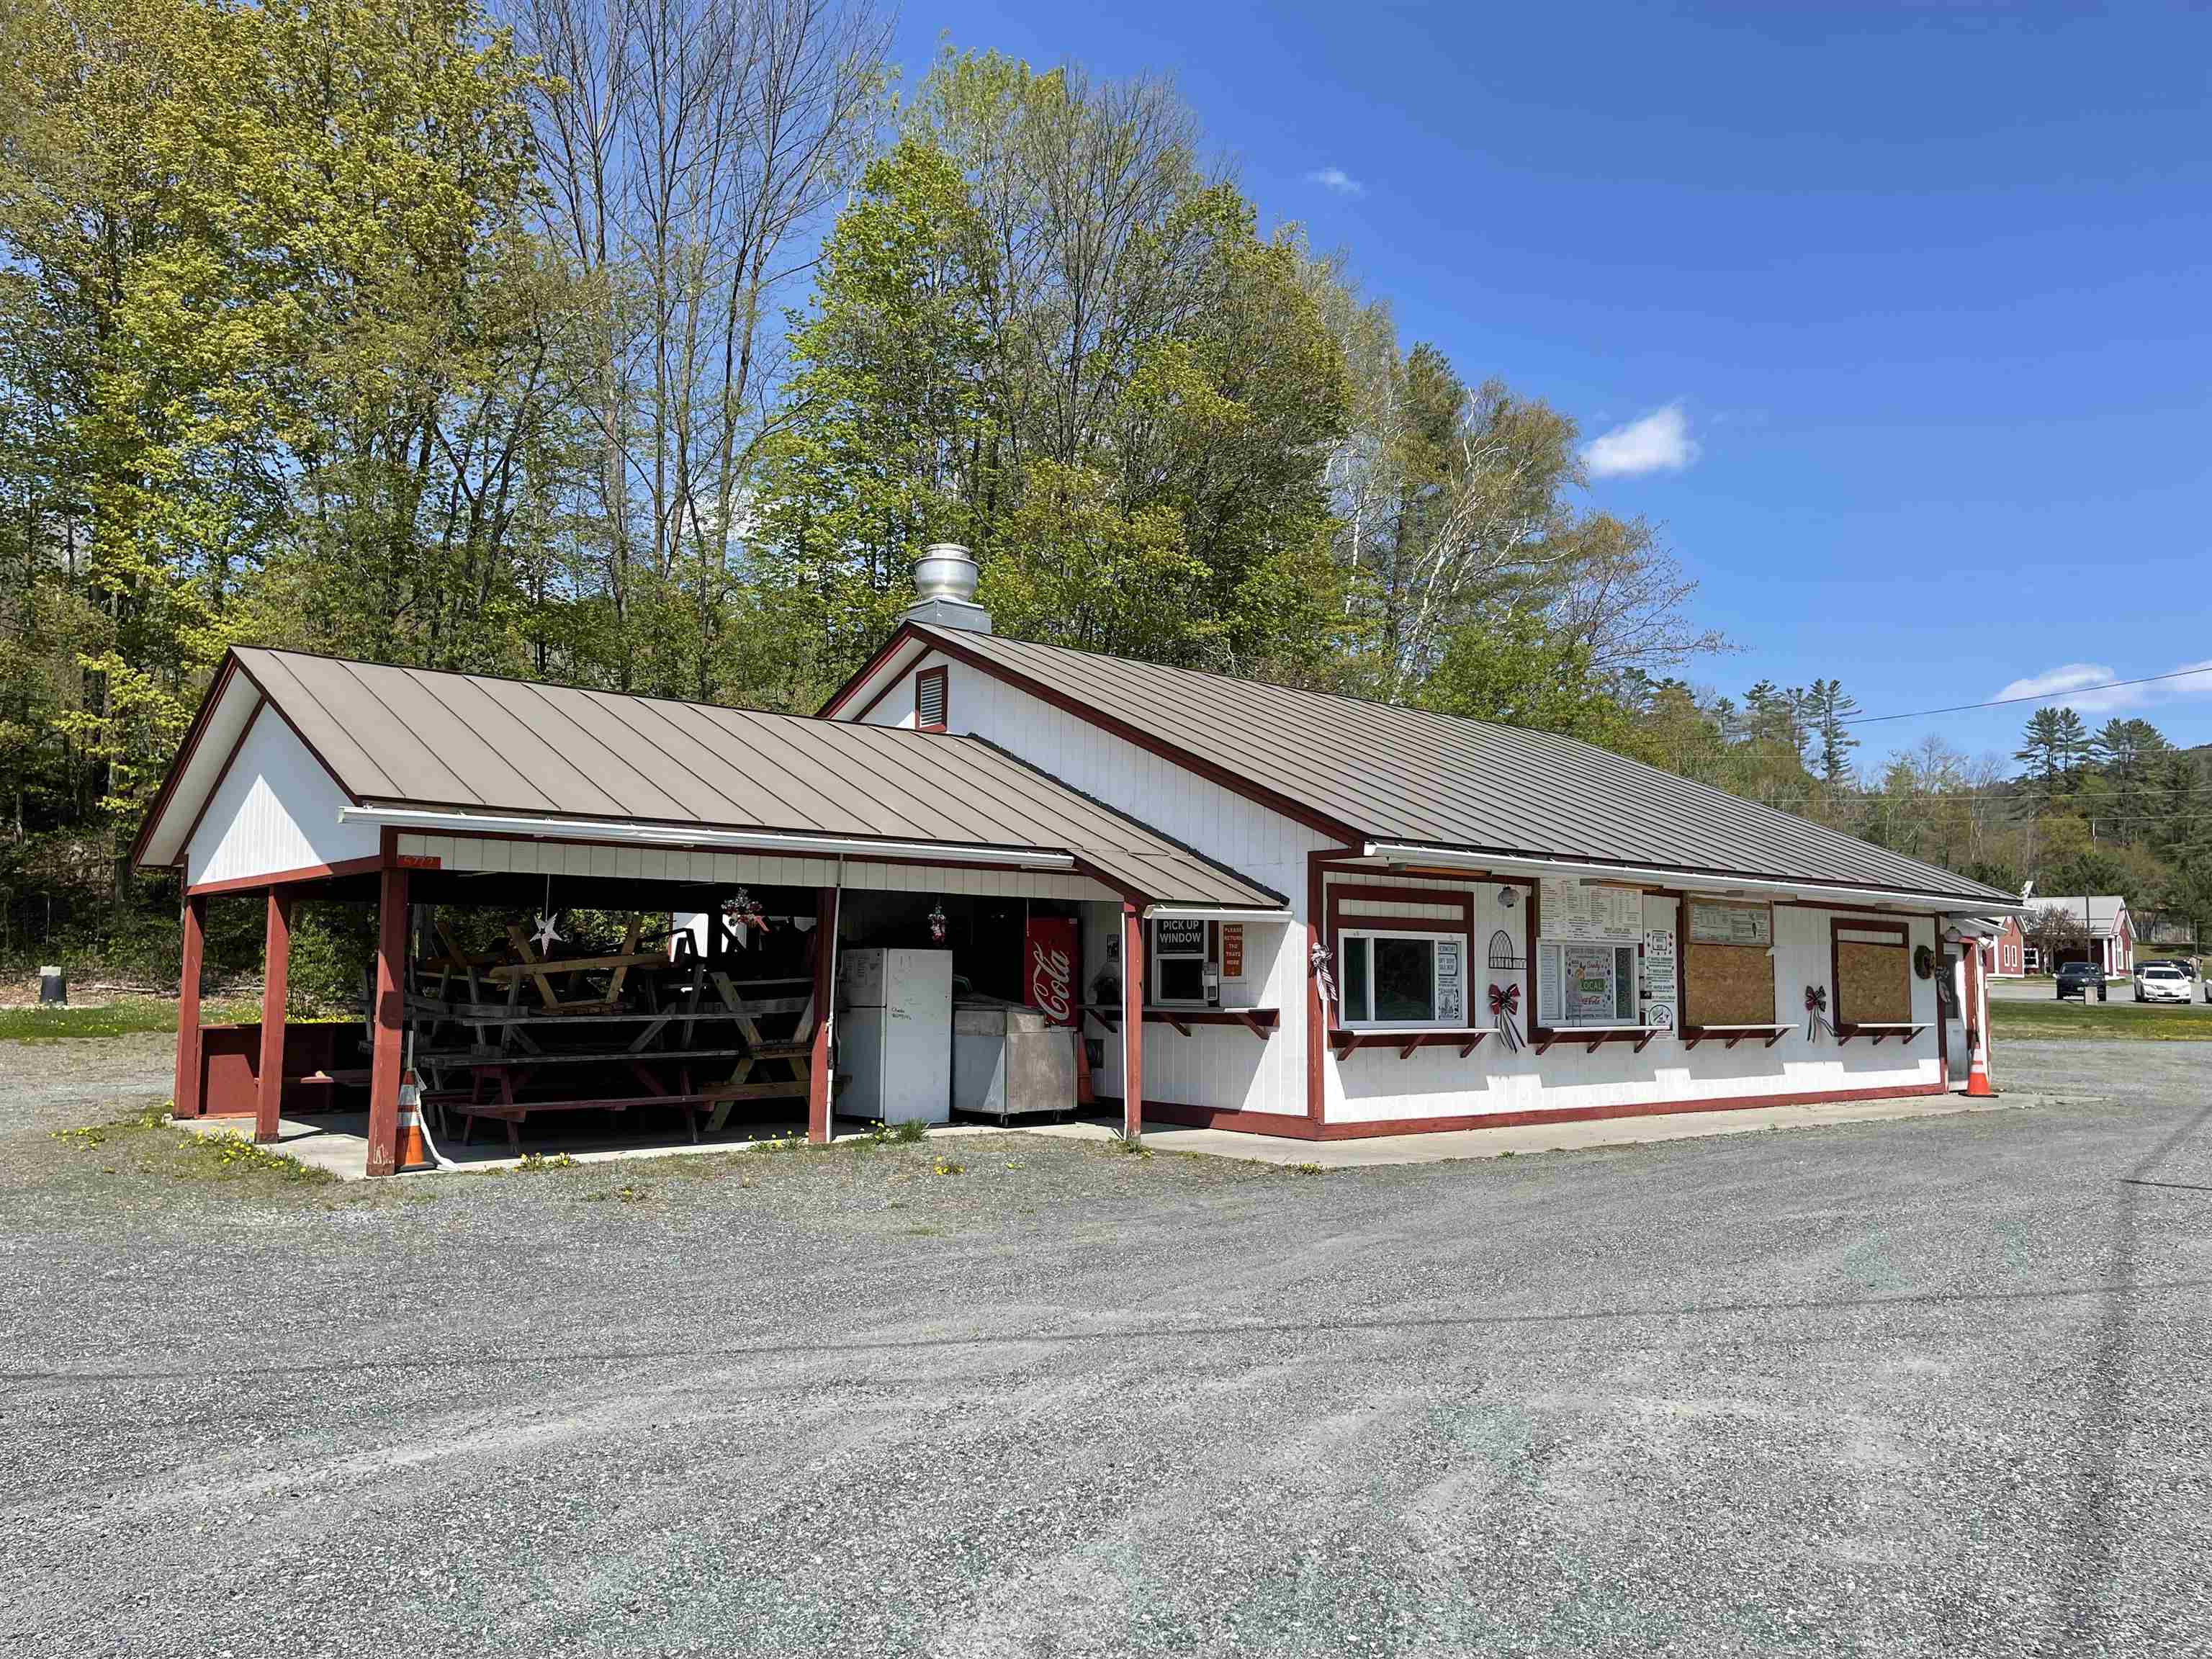 SHARON VT Commercial Property for sale $$299,000 | $166 per sq.ft.